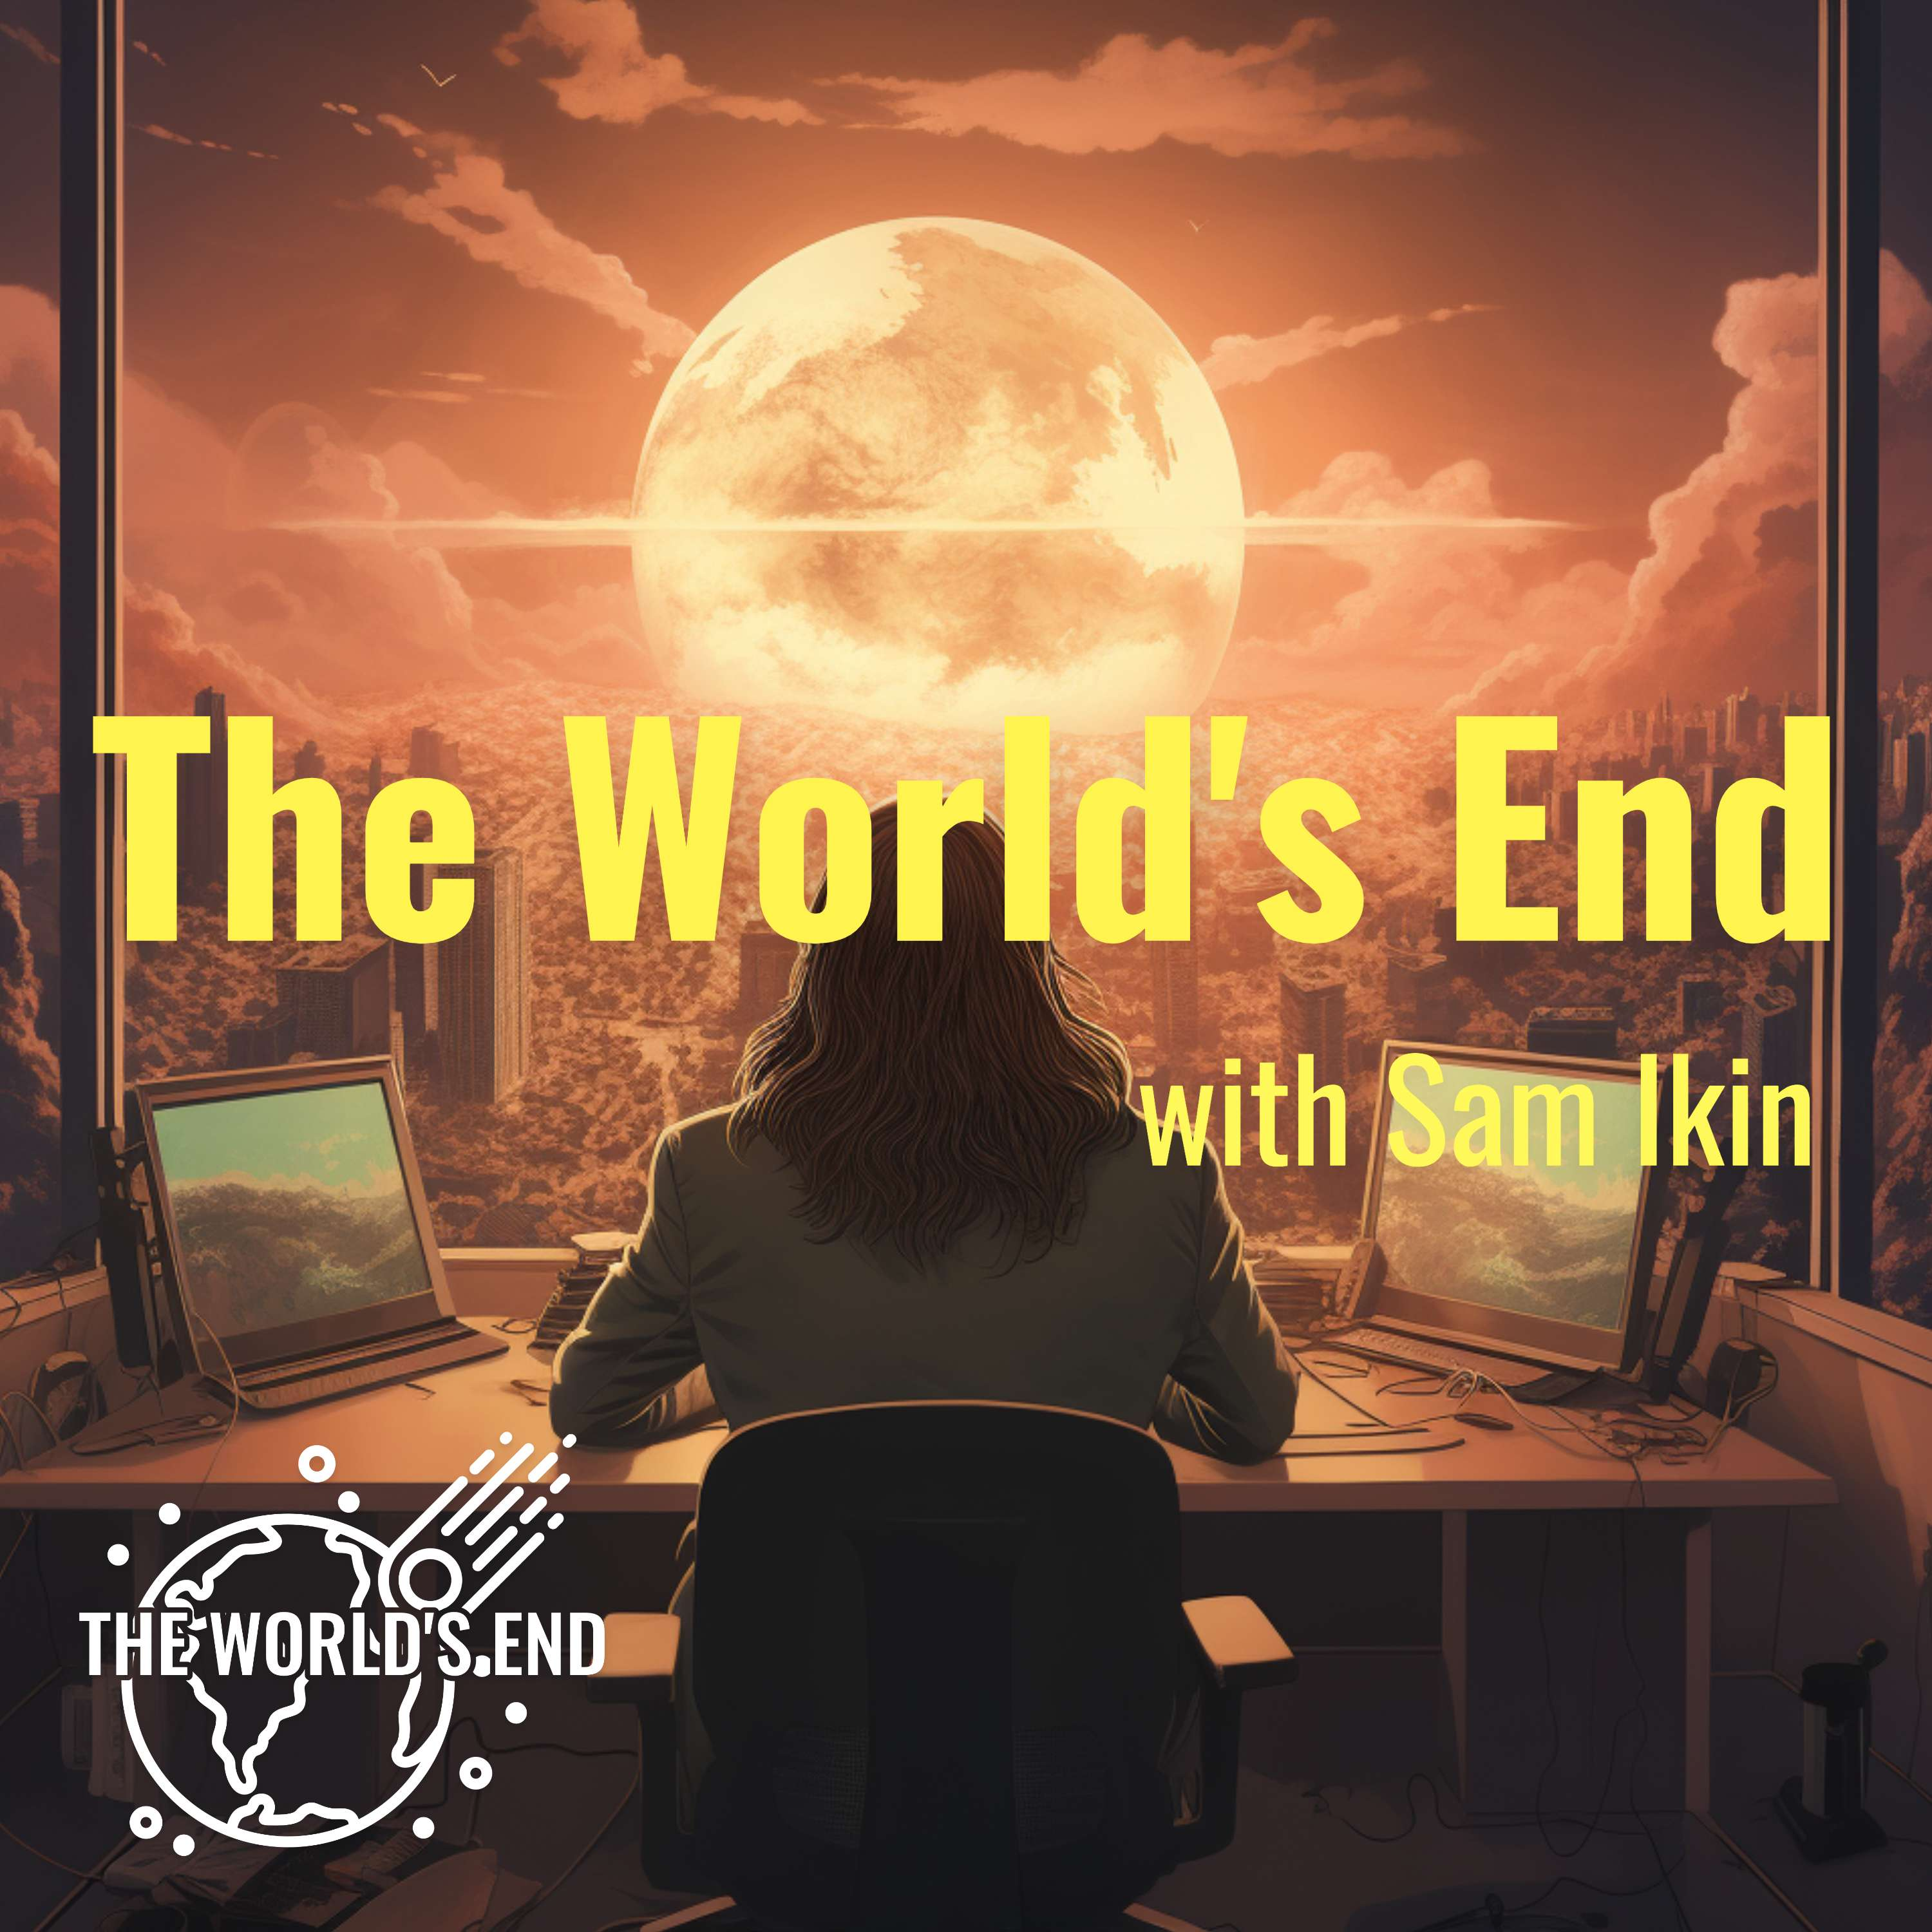 Introducing The World's End